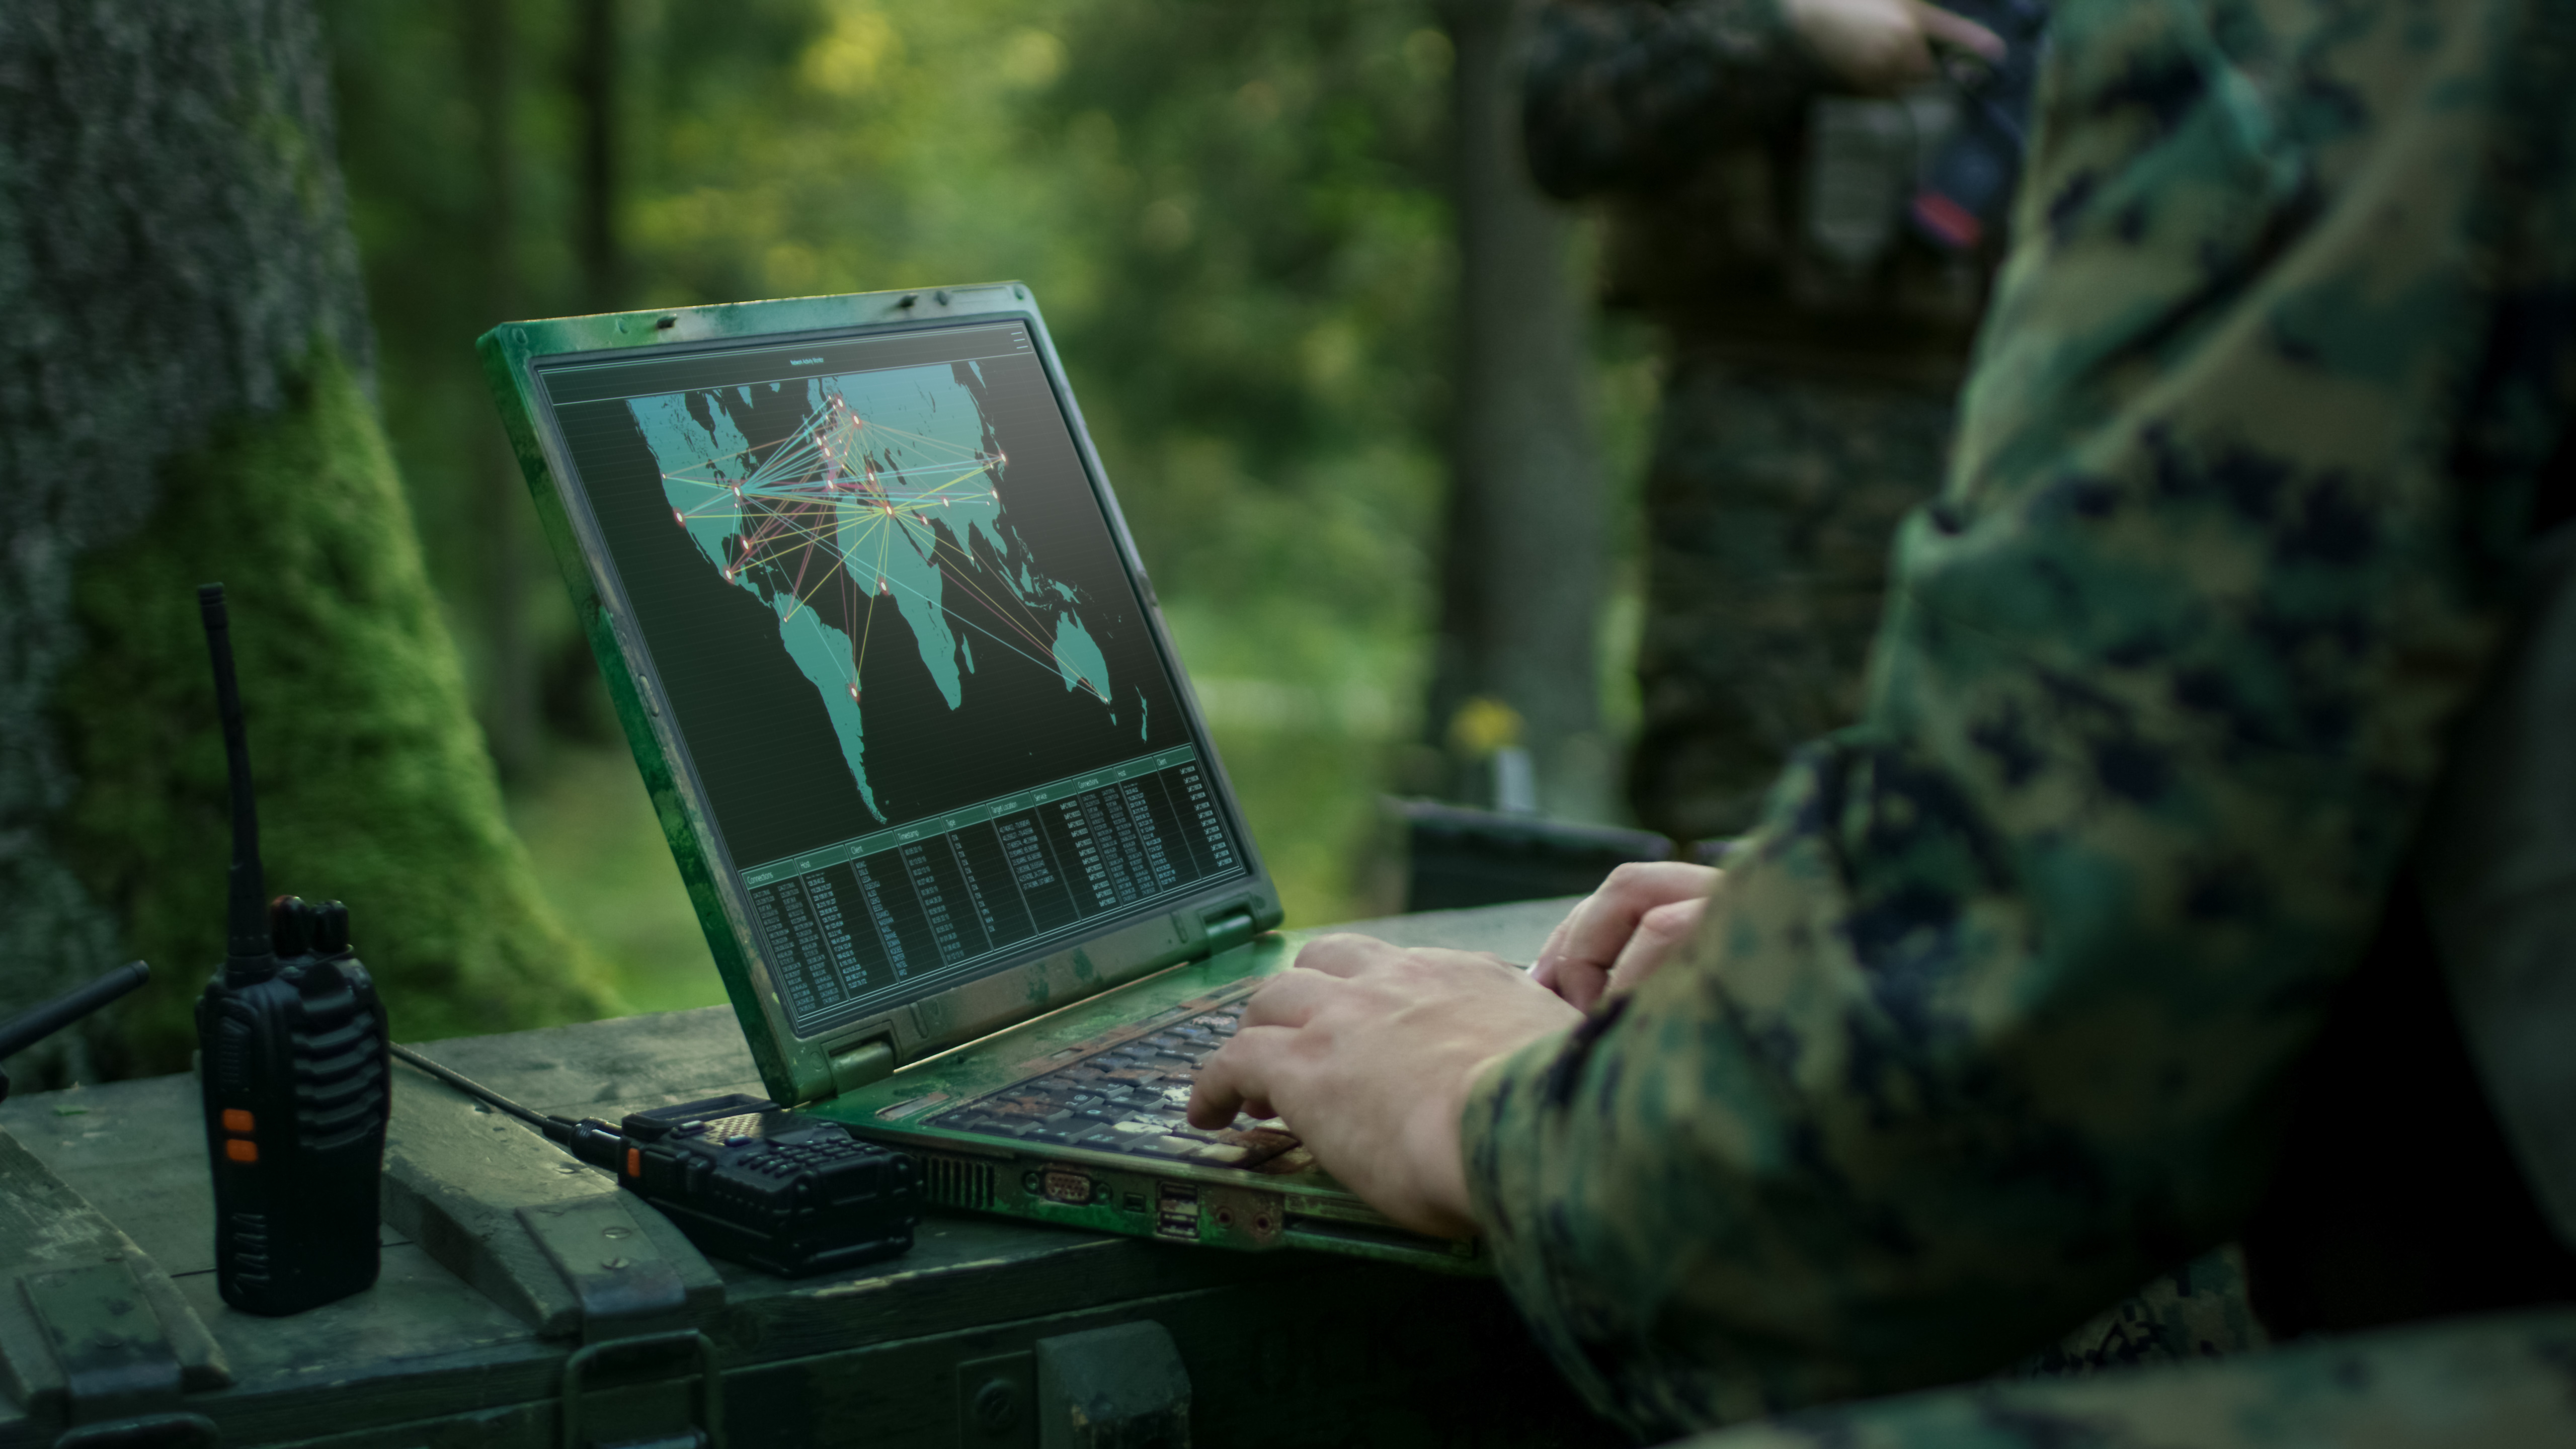 A person in green military fatigues accessing a map dashboard on an open laptop in a shady green forest